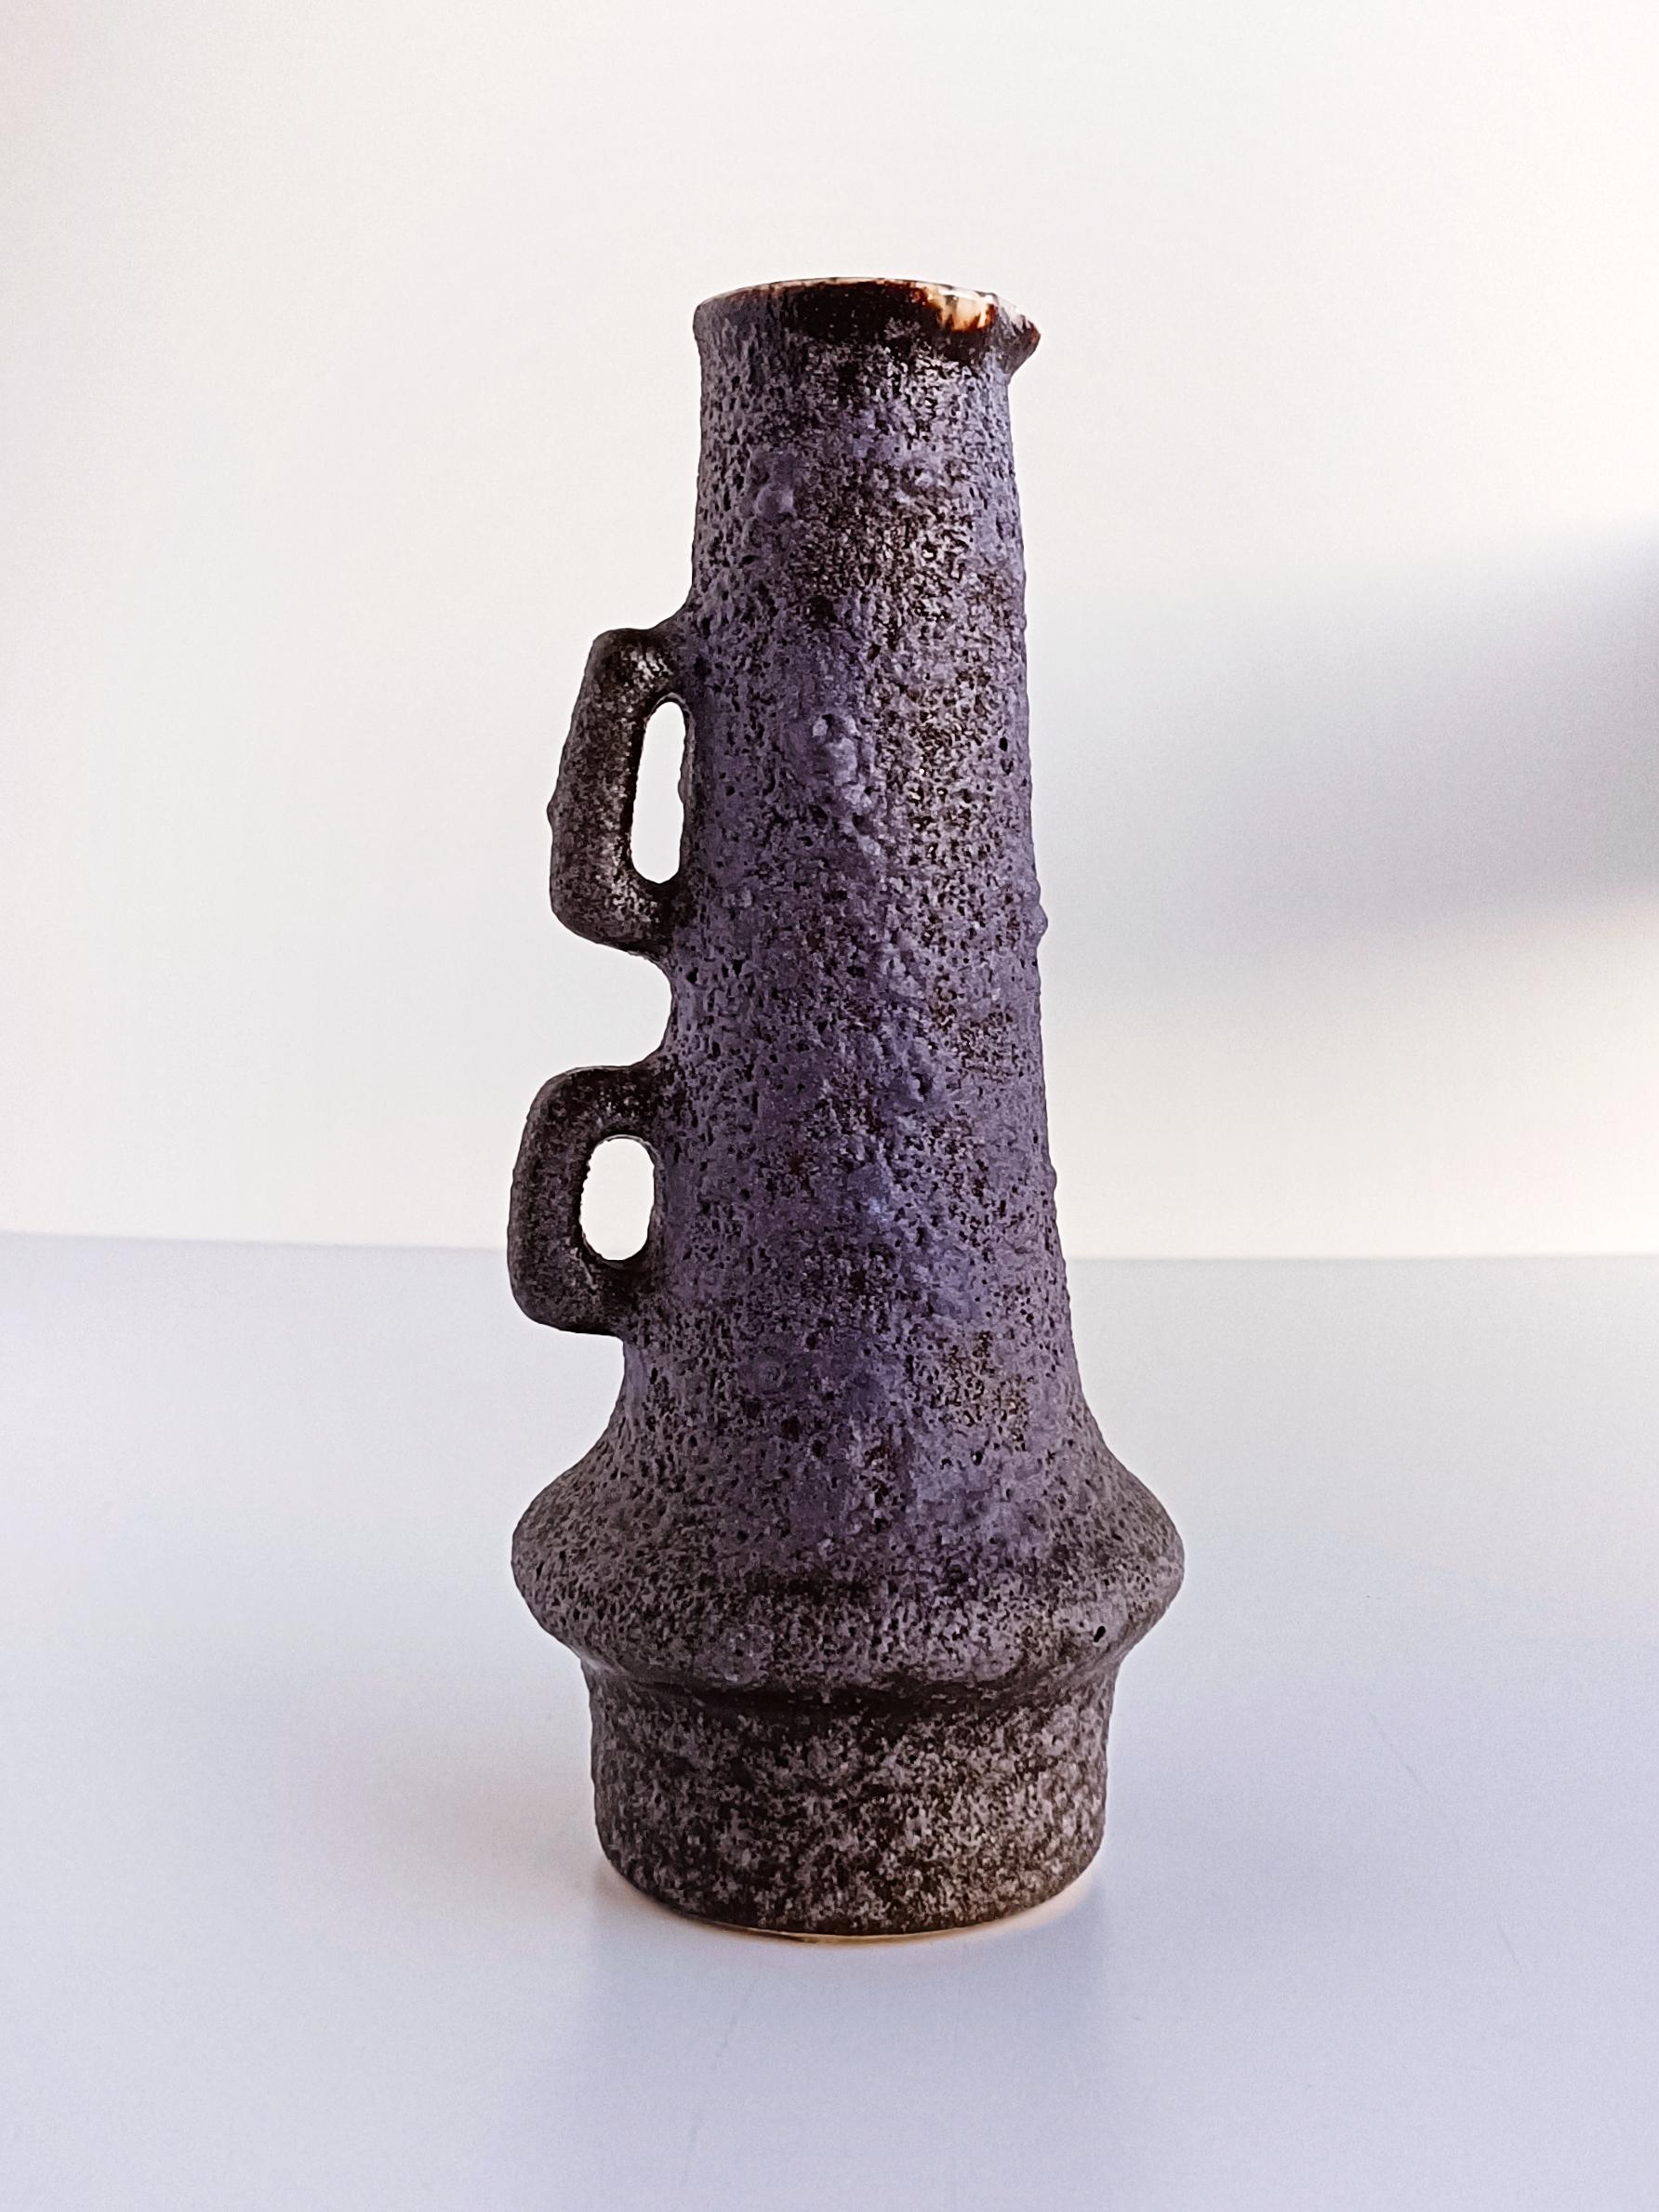 A beautiful ceramic jug featuring the lilac color Fata Lava glazing so characteristic of the Vest Ceramic studio production circa the 1960s. Marius Van Woerden focused on this type of brutalist ceramics, creating organic shapes and raw fat lava